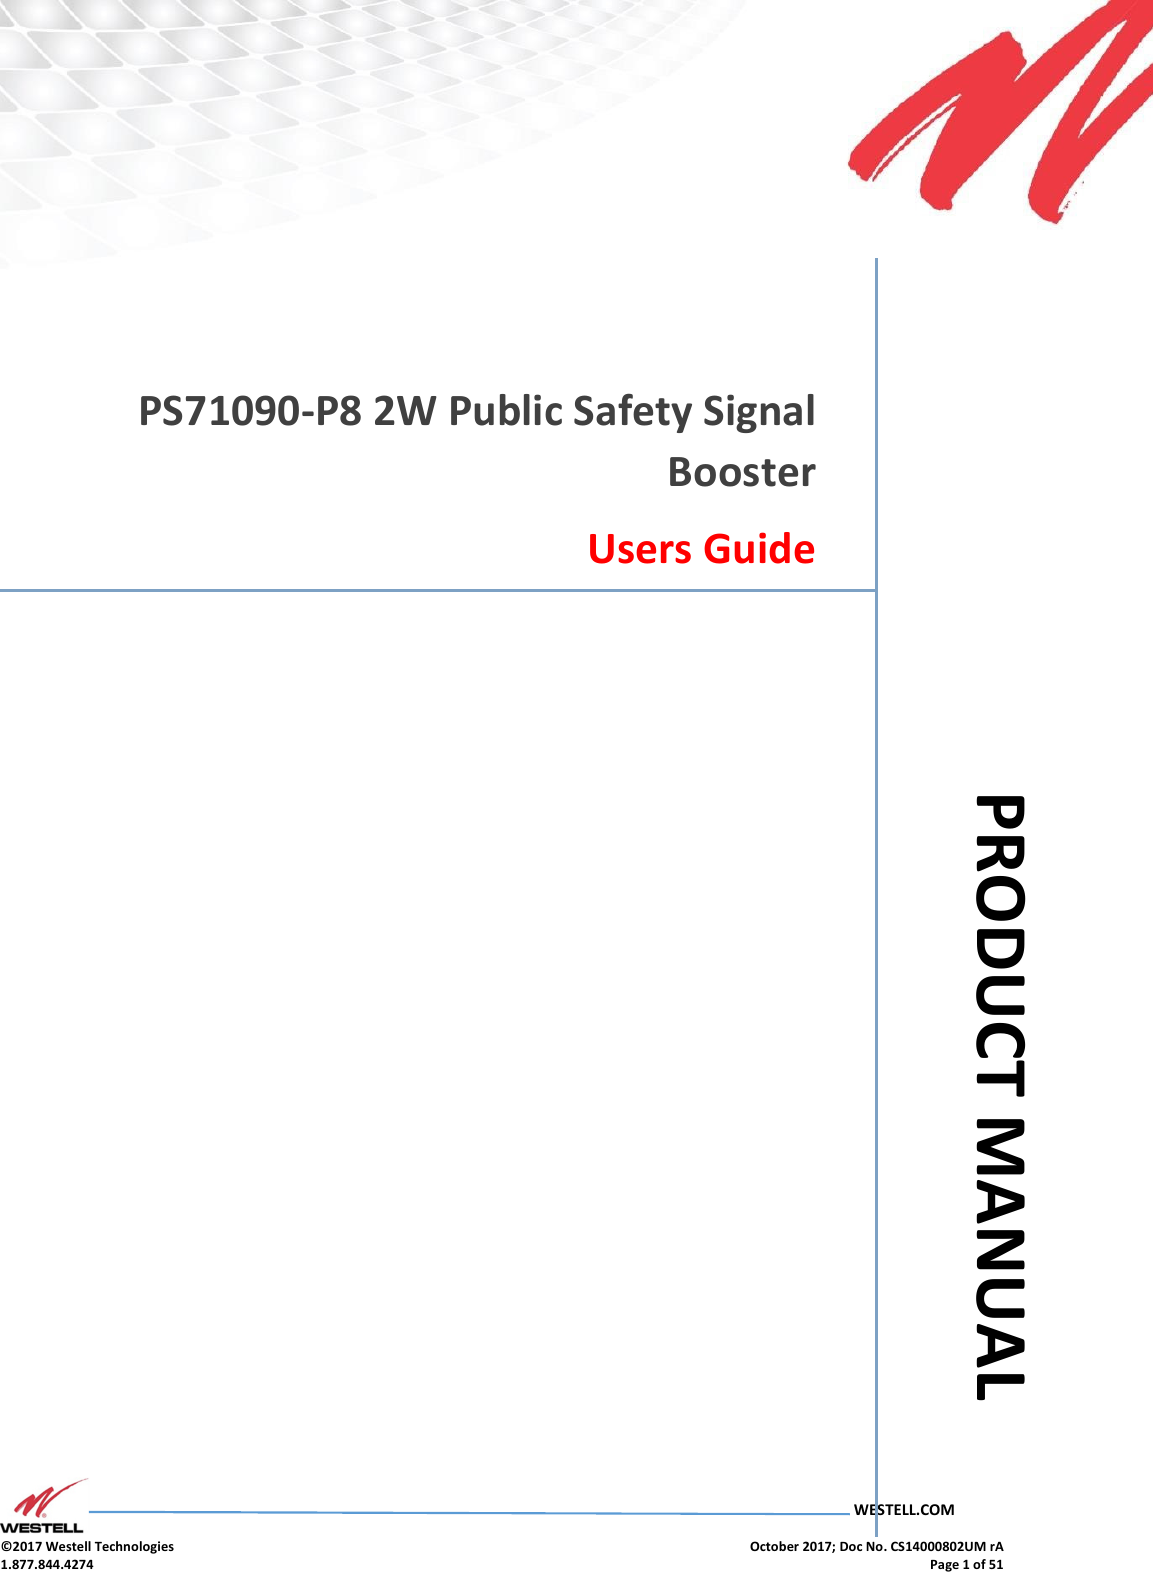      PS71090-P8 Product Manual  October 2017, Rev A  WESTELL.COM  ©2017 Westell Technologies    October 2017; Doc No. CS14000802UM rA 1.877.844.4274    Page 1 of 51 5689     PS71090-P8 2W Public Safety Signal Booster Users Guide            PRODUCT MANUAL 